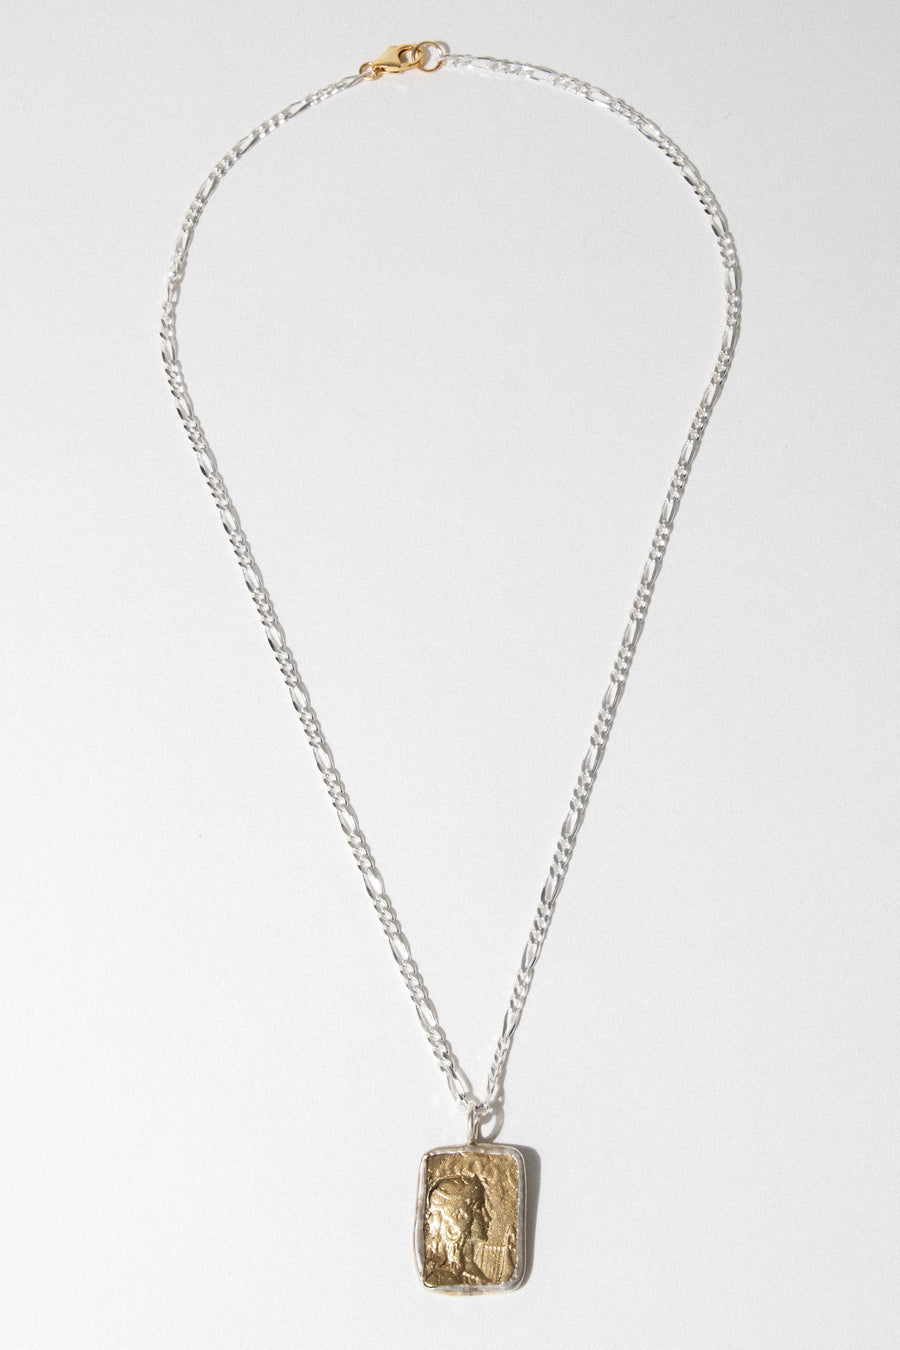 CGM Jewelry Silver / 22 Inches Goddess Necklace